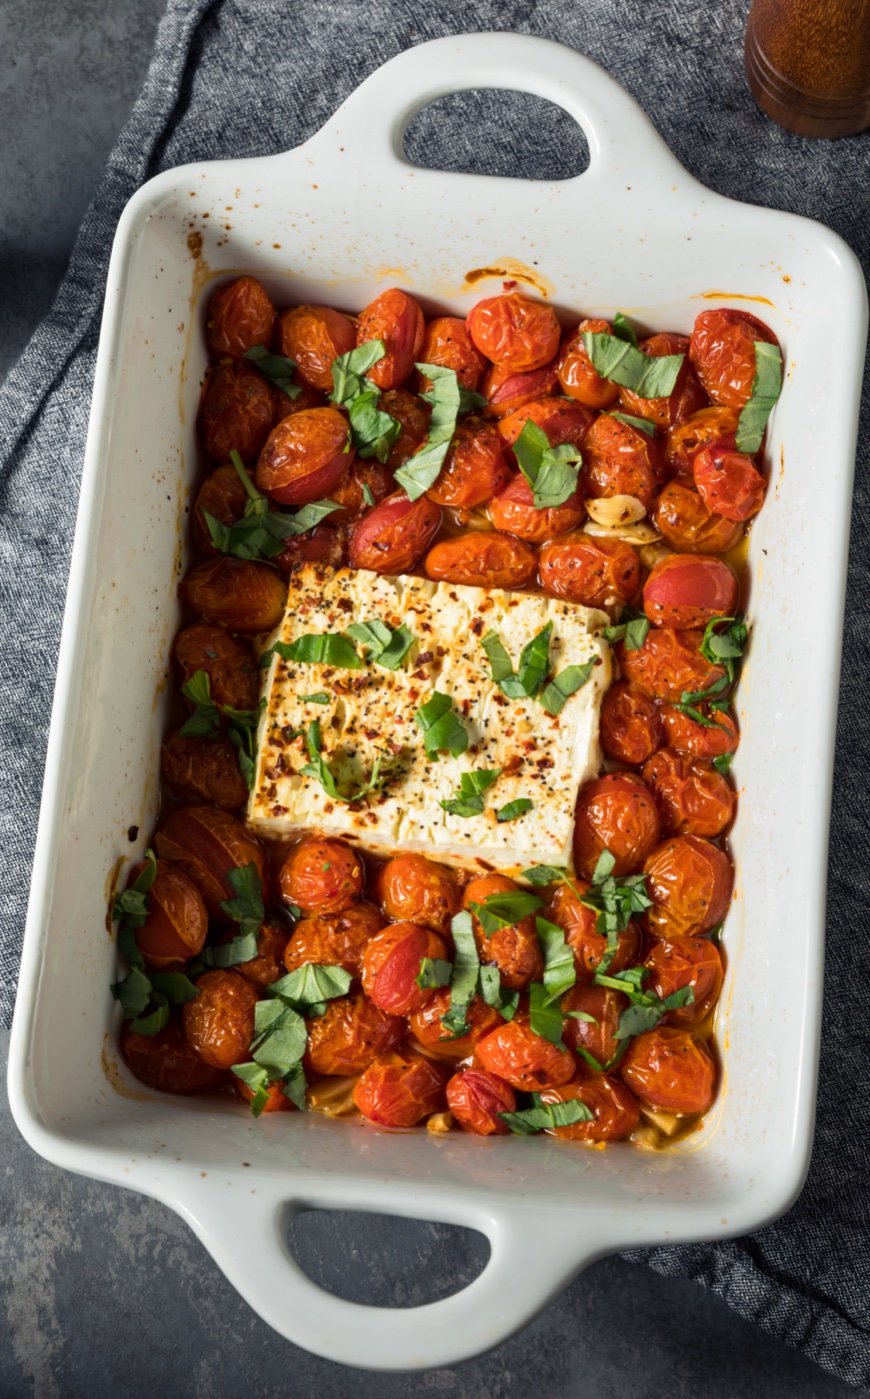 How to make baked feta pasta! This easy dinner idea is a favorite meal in my family, even with my picky eaters. It's healthy, vegetarian, and delicious! You can also add chicken if you'd like. 